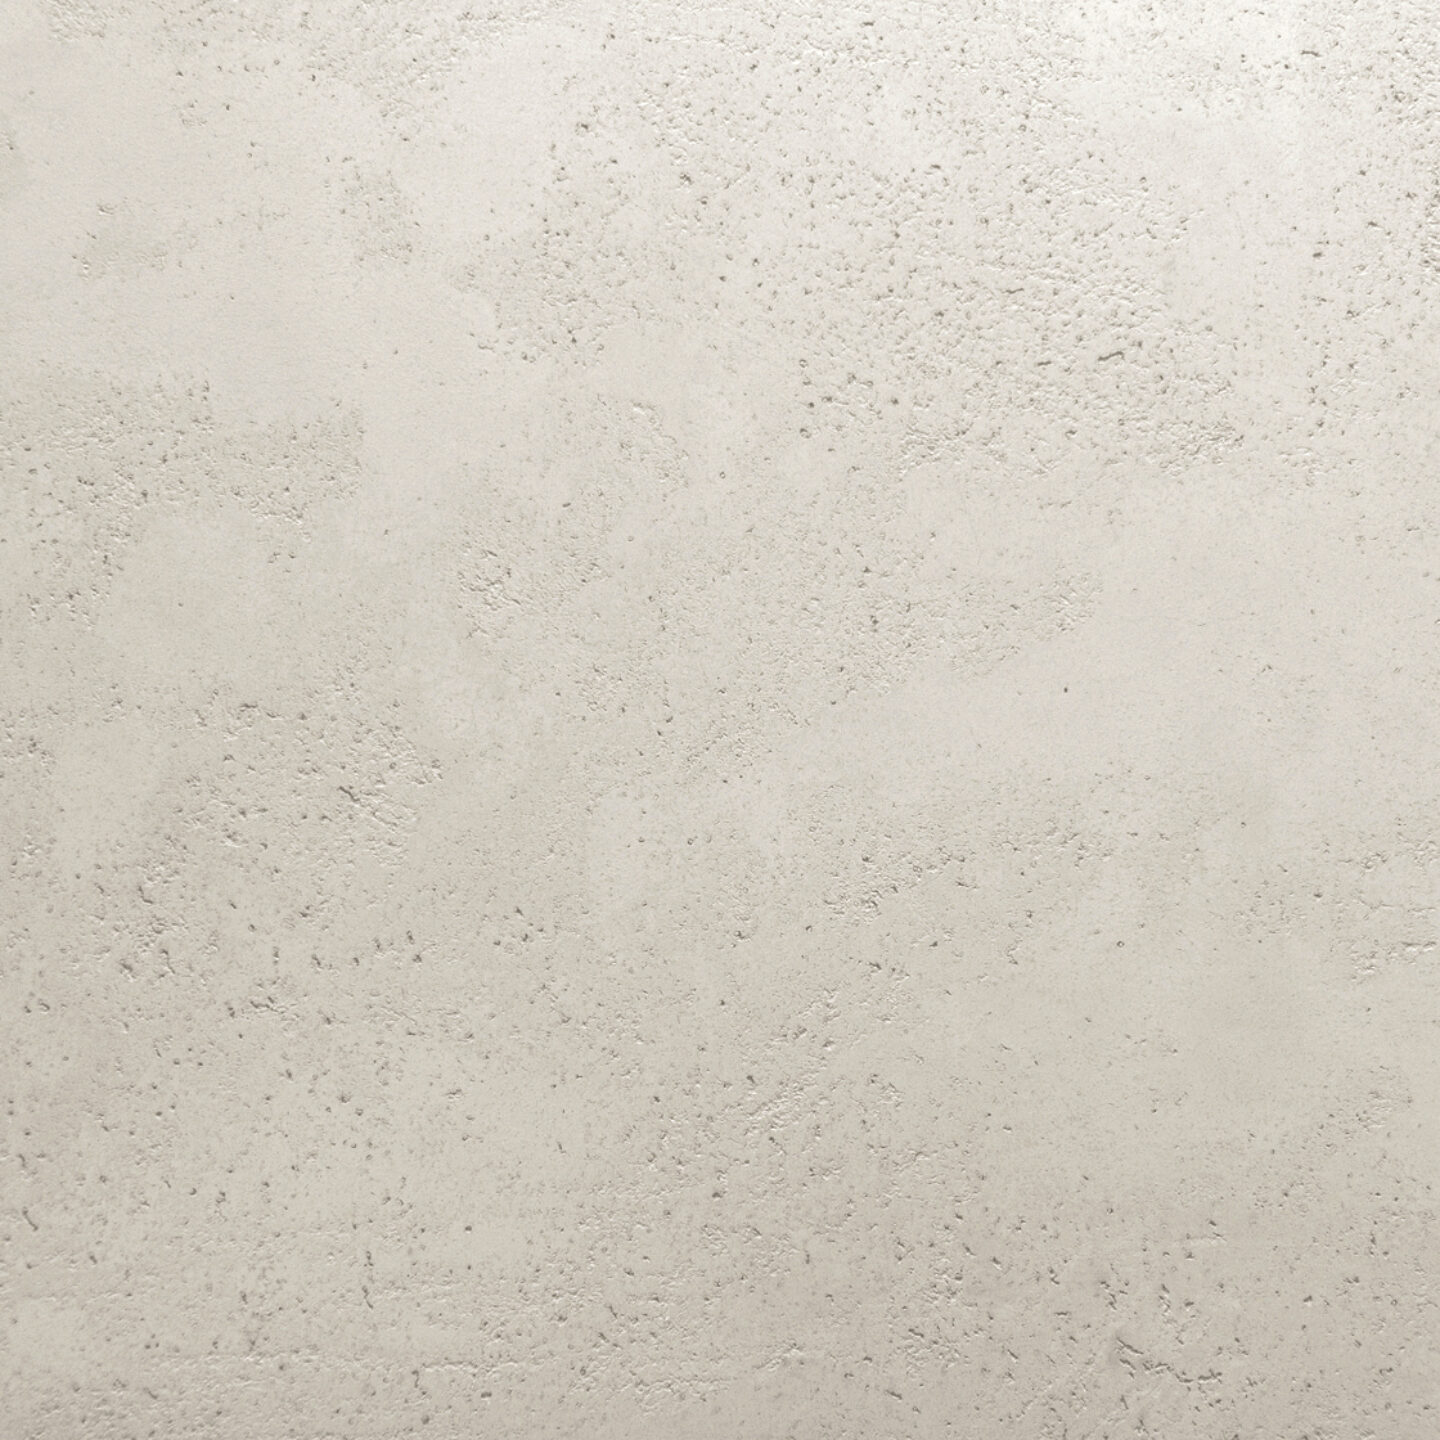 Close up of Armourcoat Koncrete Textured concrete polished plaster finish - 08